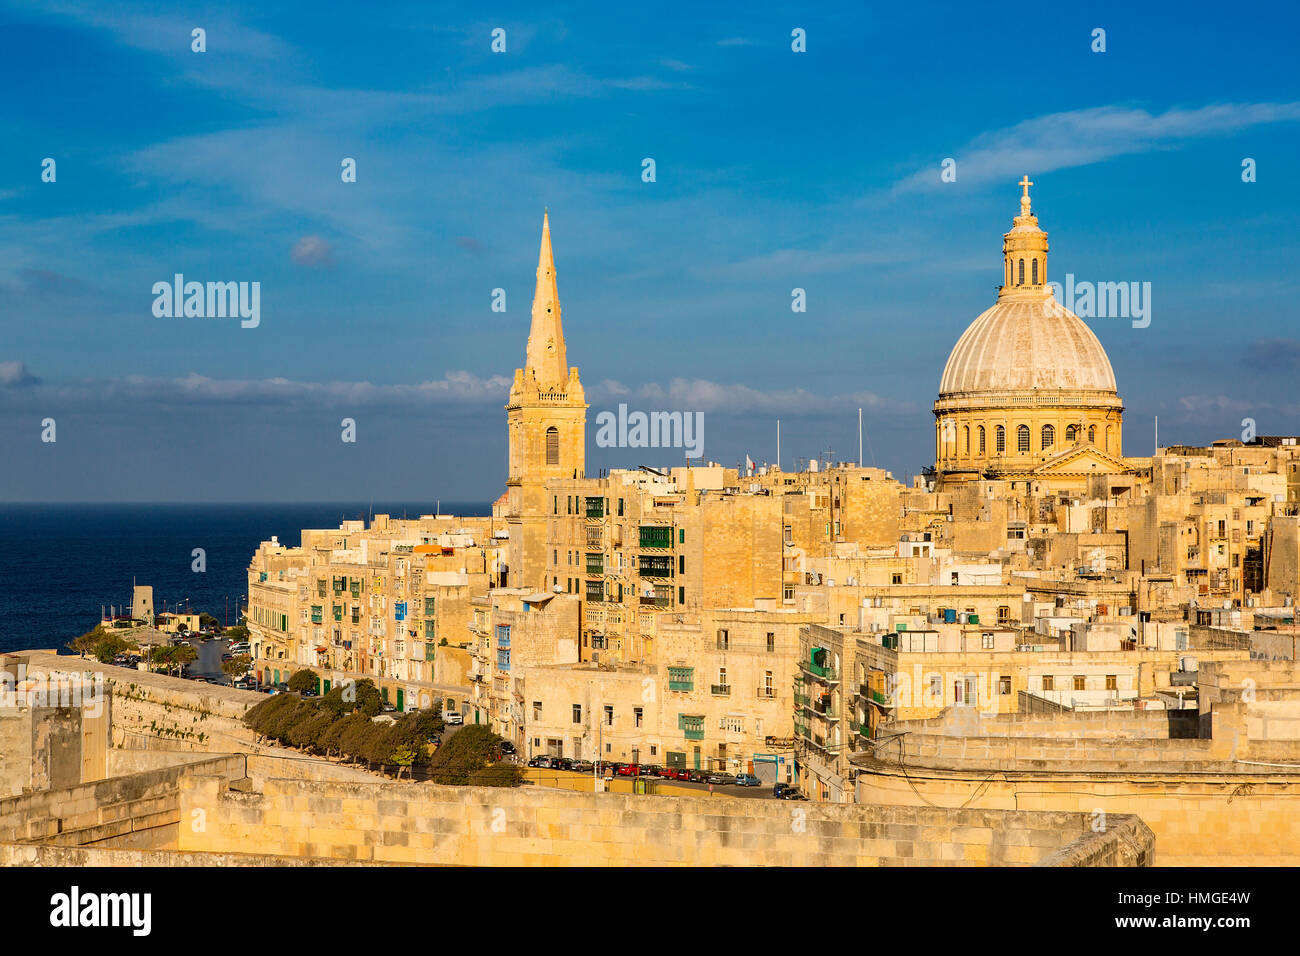 Malta, Valletta, skyline with St. Paul's Anglican Cathedral and Carmelite Church. Stock Photo